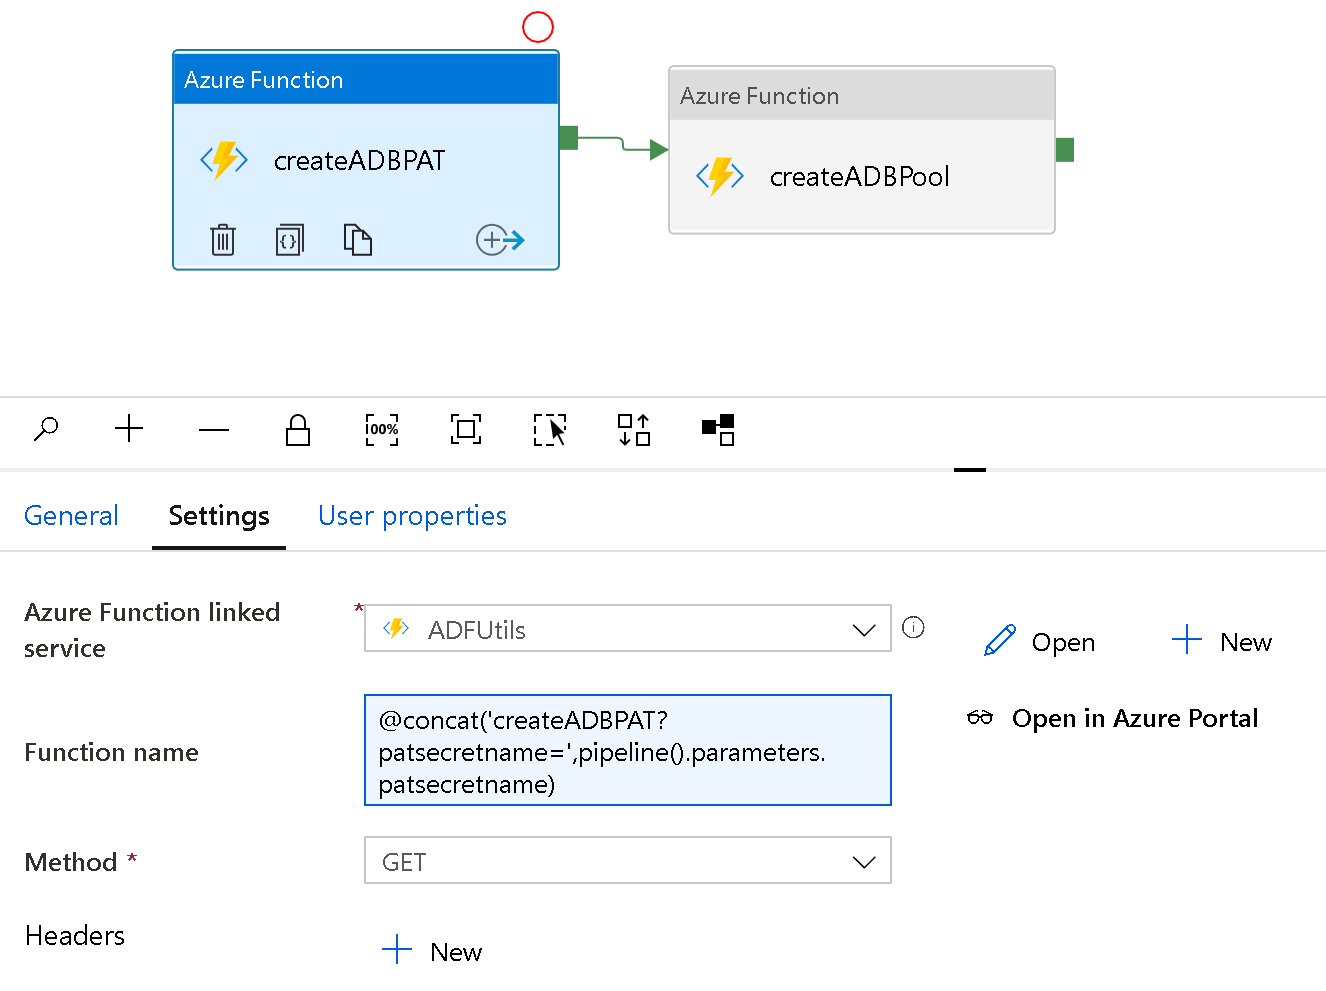 Creating two new Azure Functions